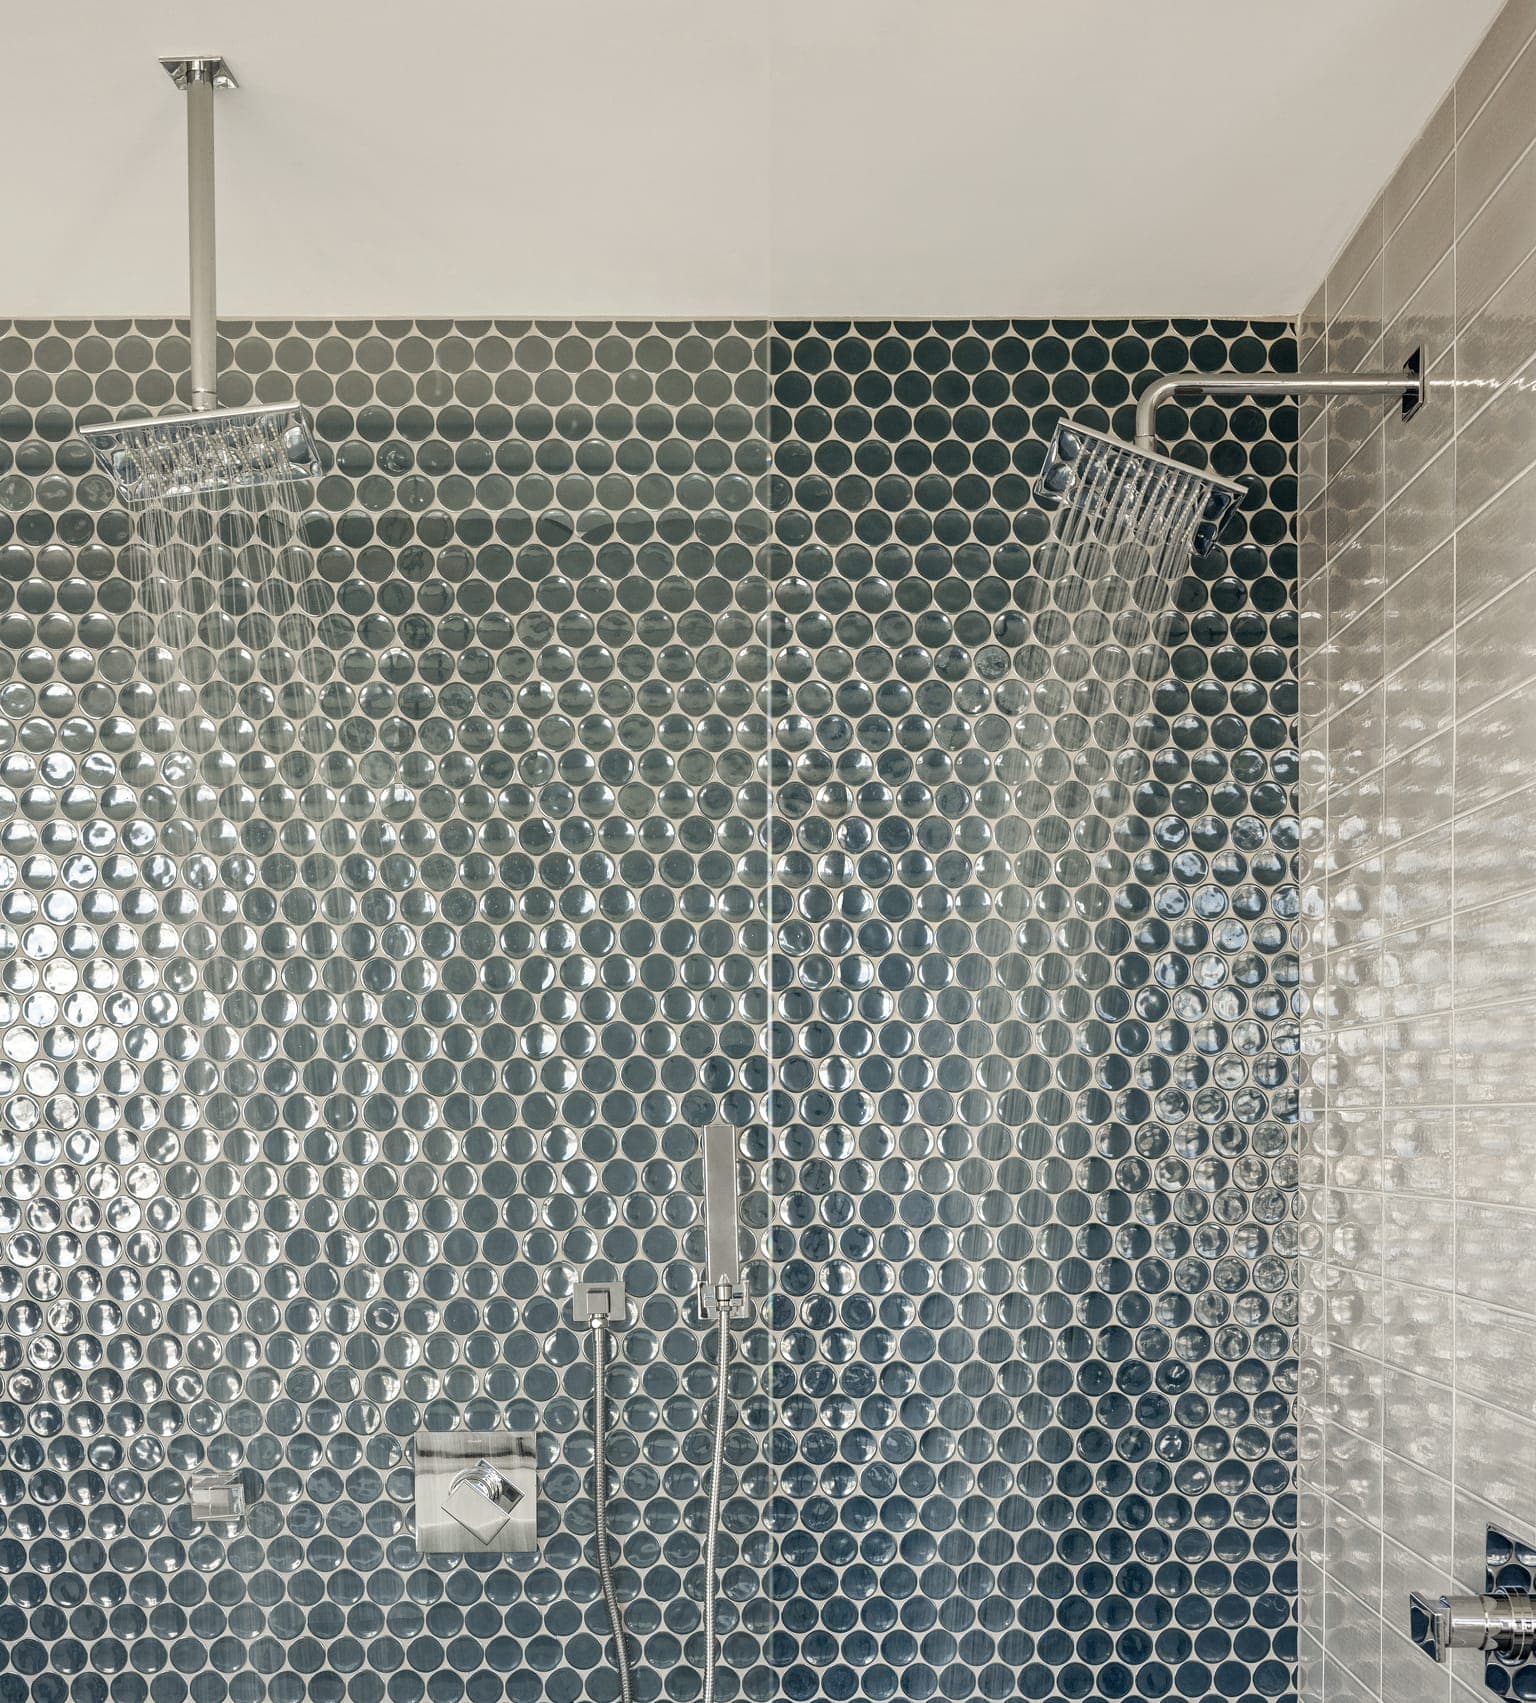 Jkl Penthouse The Blvd Contemporary Shower Circle Fish Scale Wall Tile